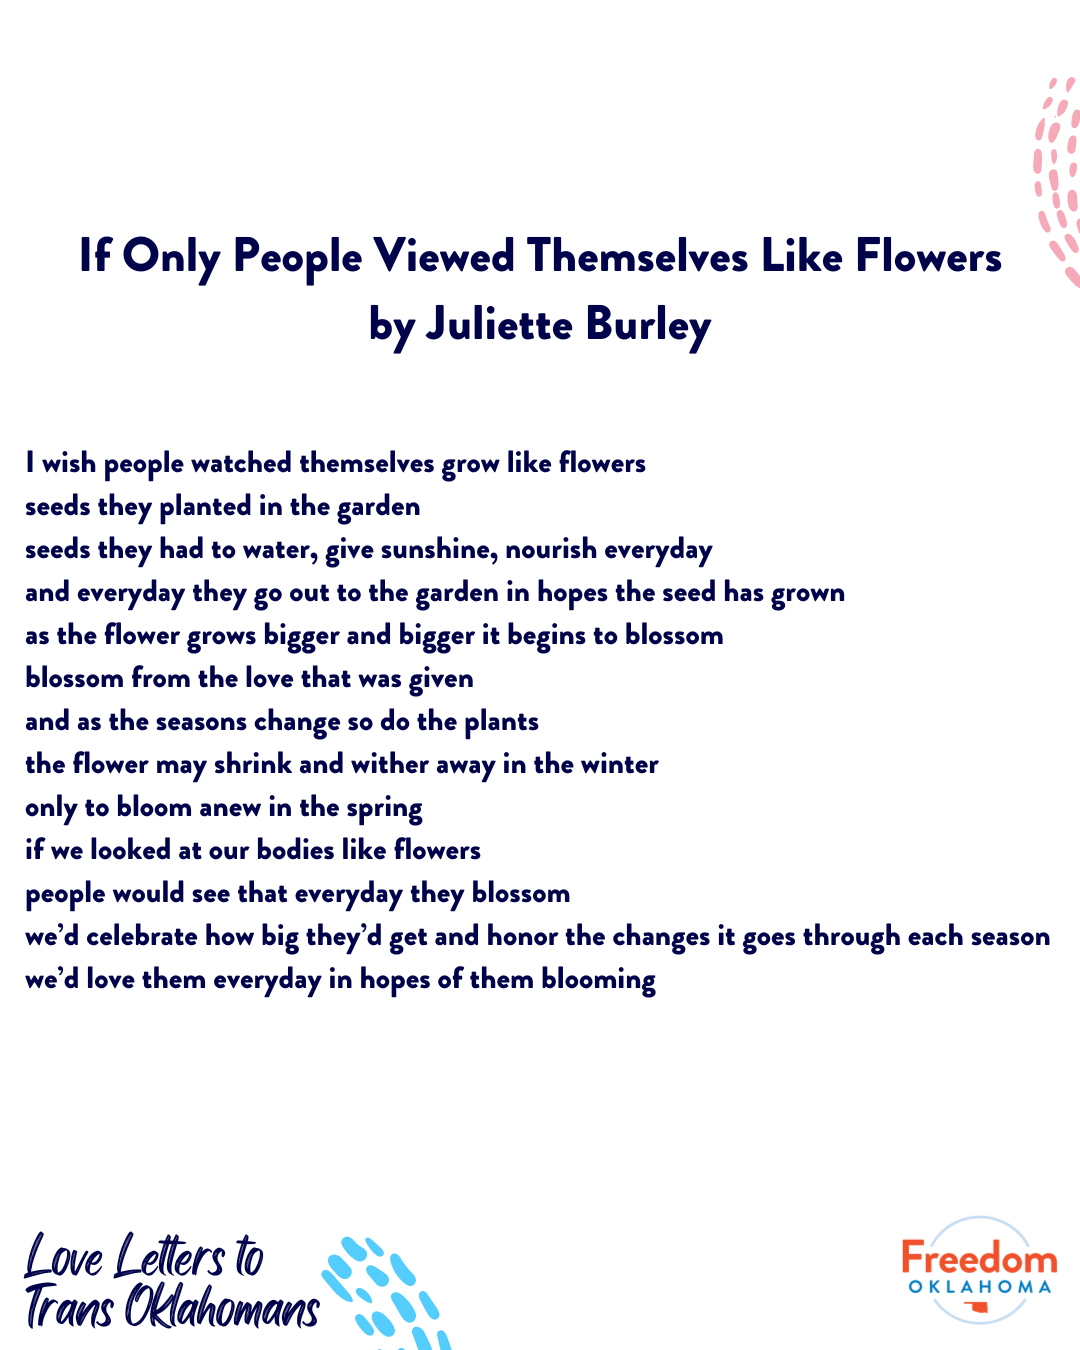  The poem If Only People Viewed Themselves Like Flowers by Juliette Burley: I wish people watched themselves grow like flowers seeds they planted in the garden seeds they had to water, give sunshine, nourish everyday and everyday they go out to the g